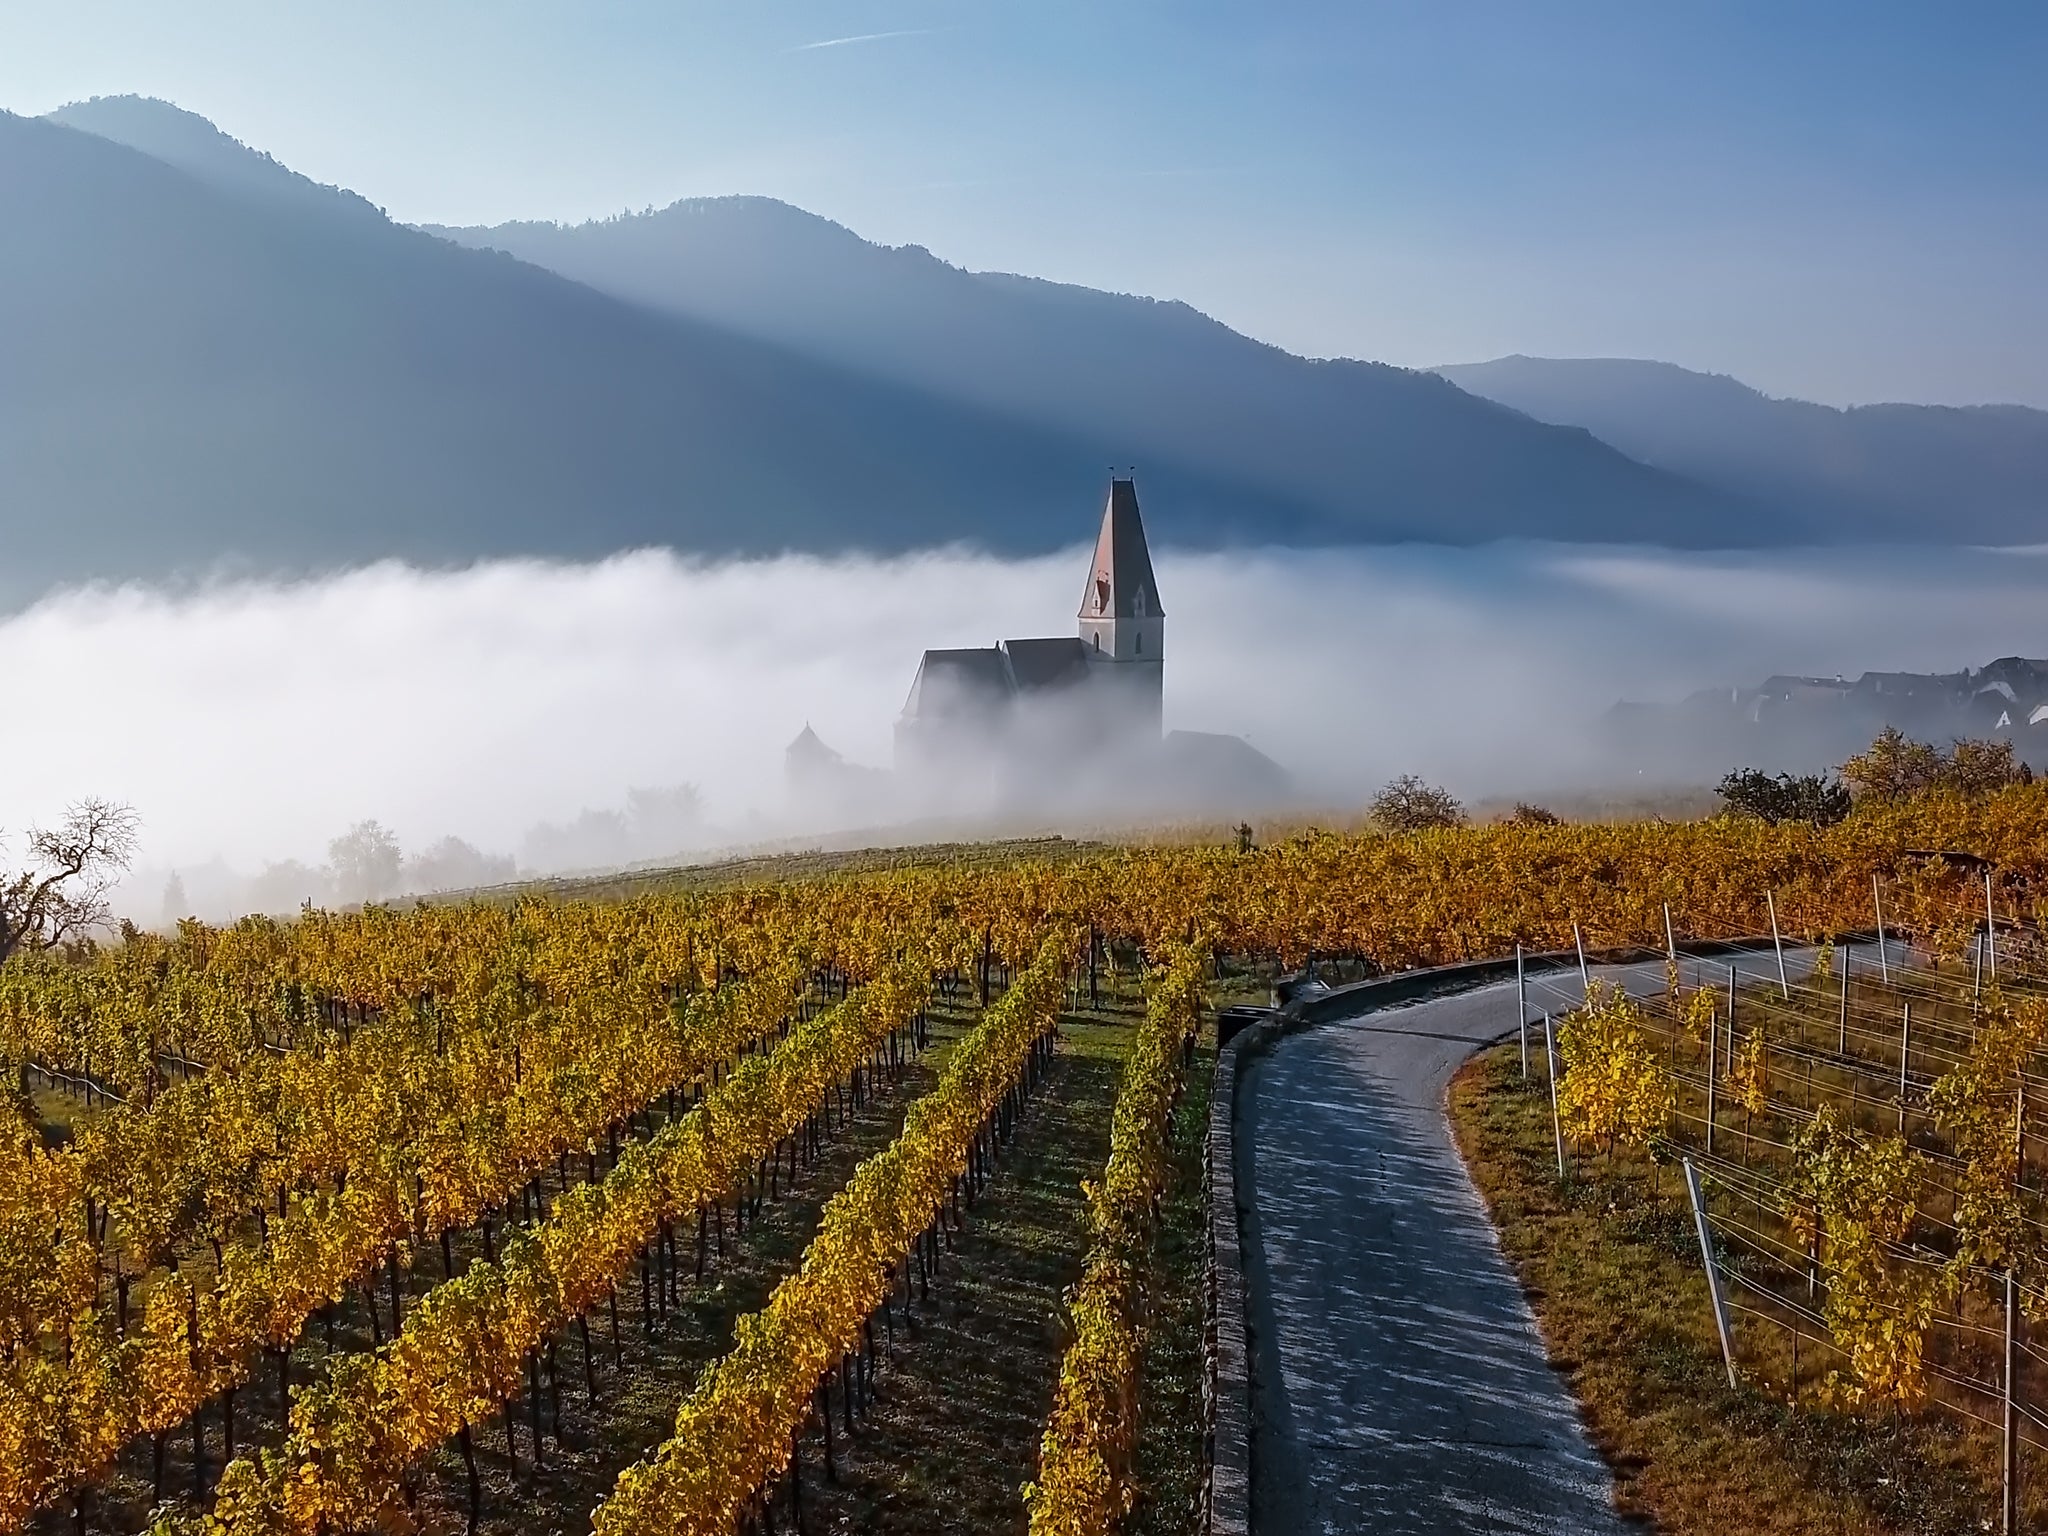 The Wachau valley is home to some of the oldest natural wine producers in the country